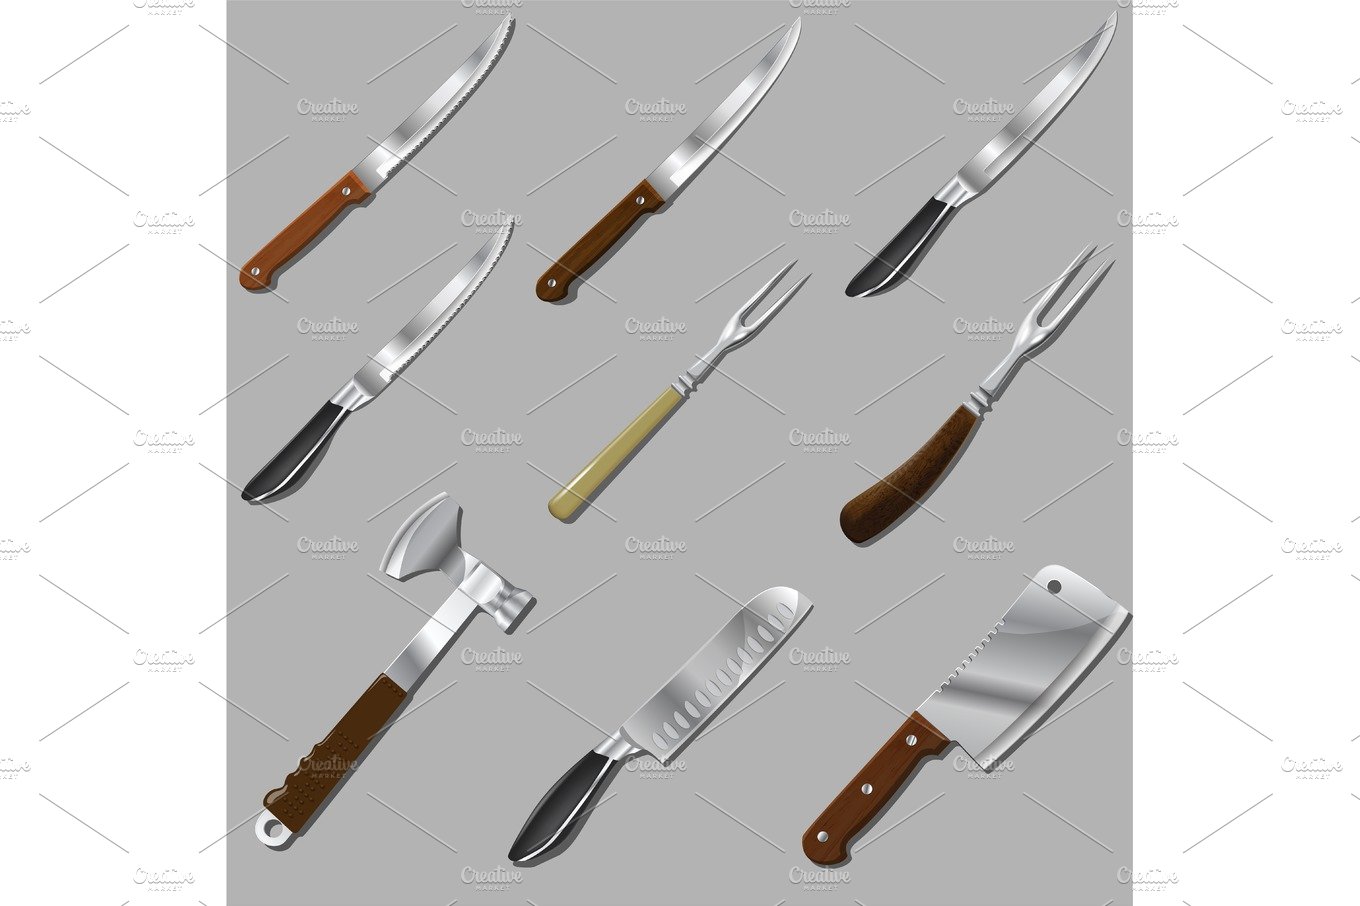 Vector set of kitchen tools cover image.